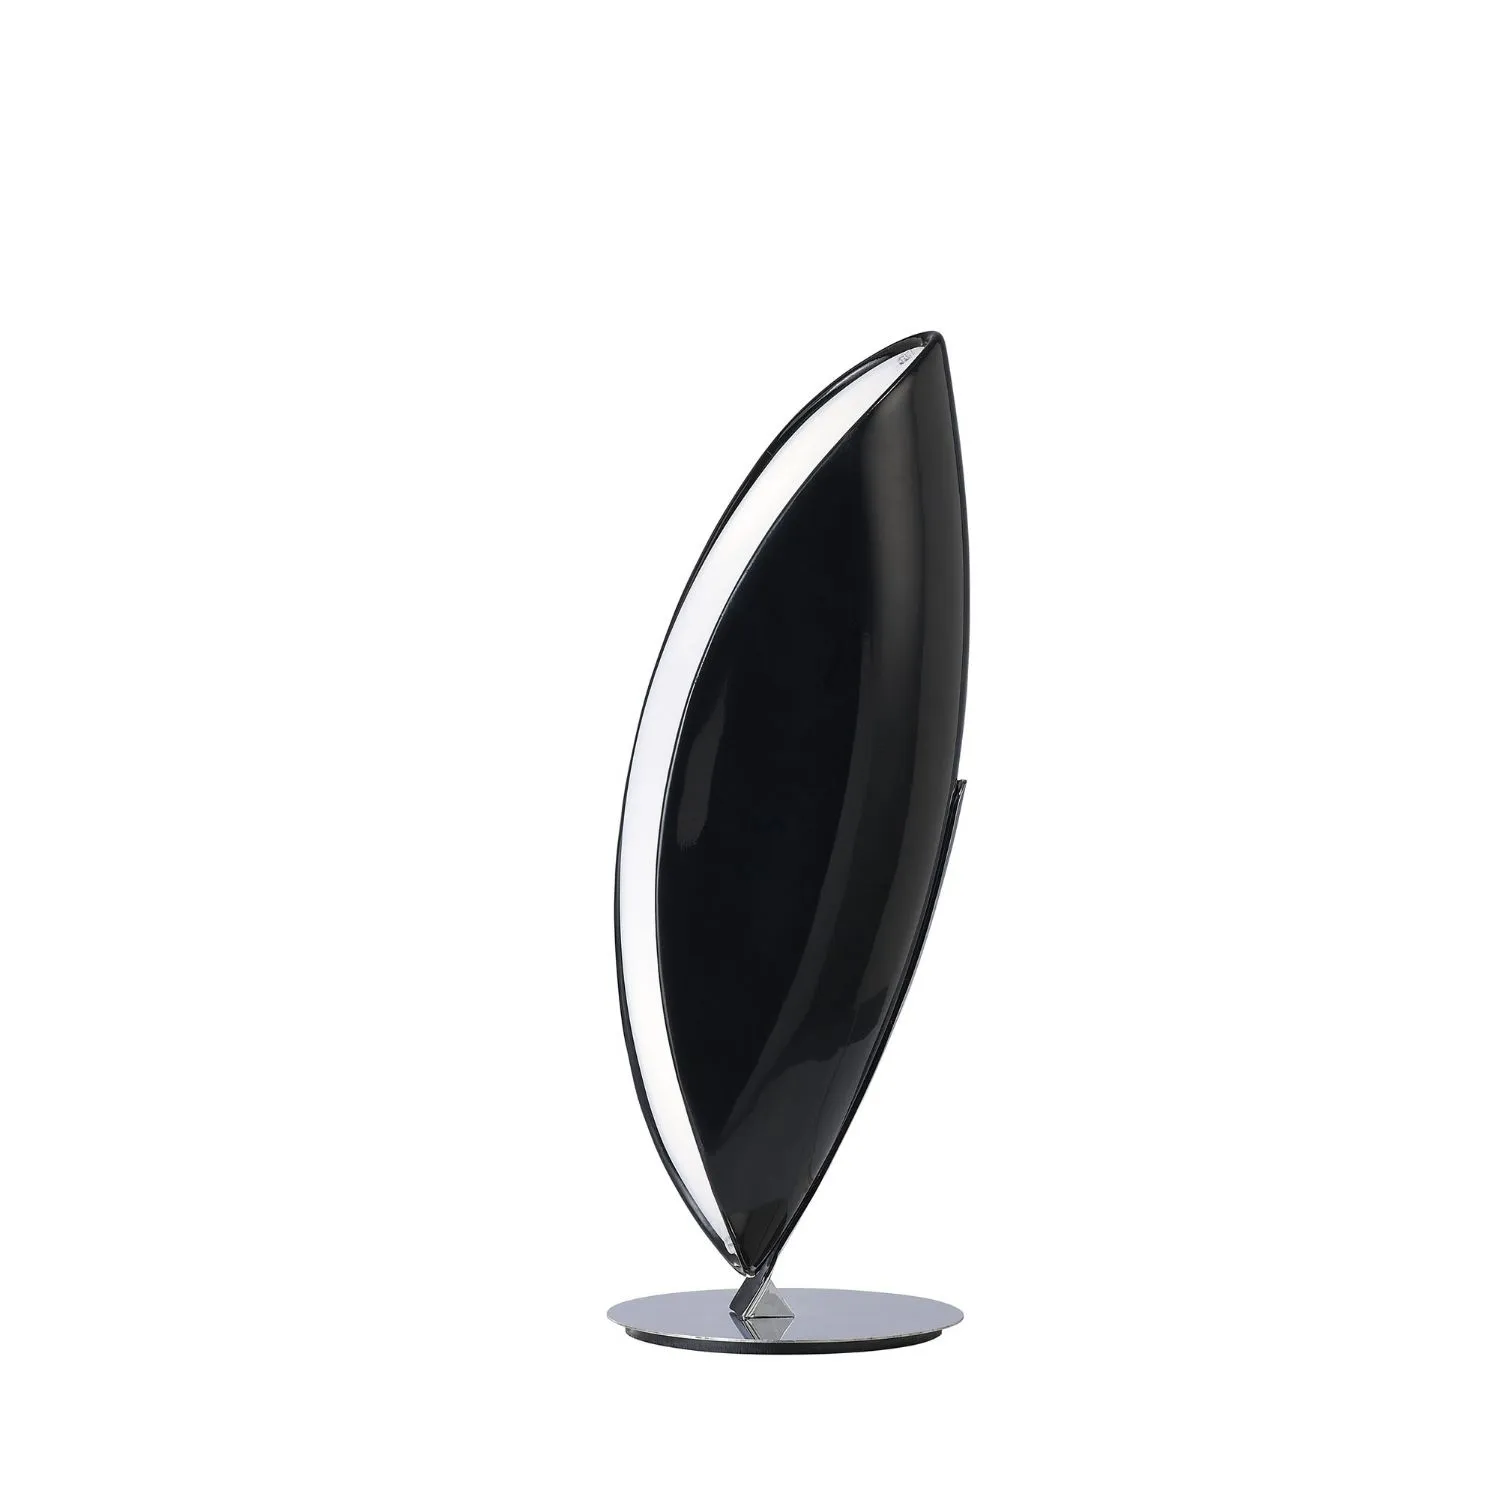 Pasion Table Lamp 2 Light E27, Gloss Black White Acrylic Polished Chrome, CFL Lamps INCLUDED